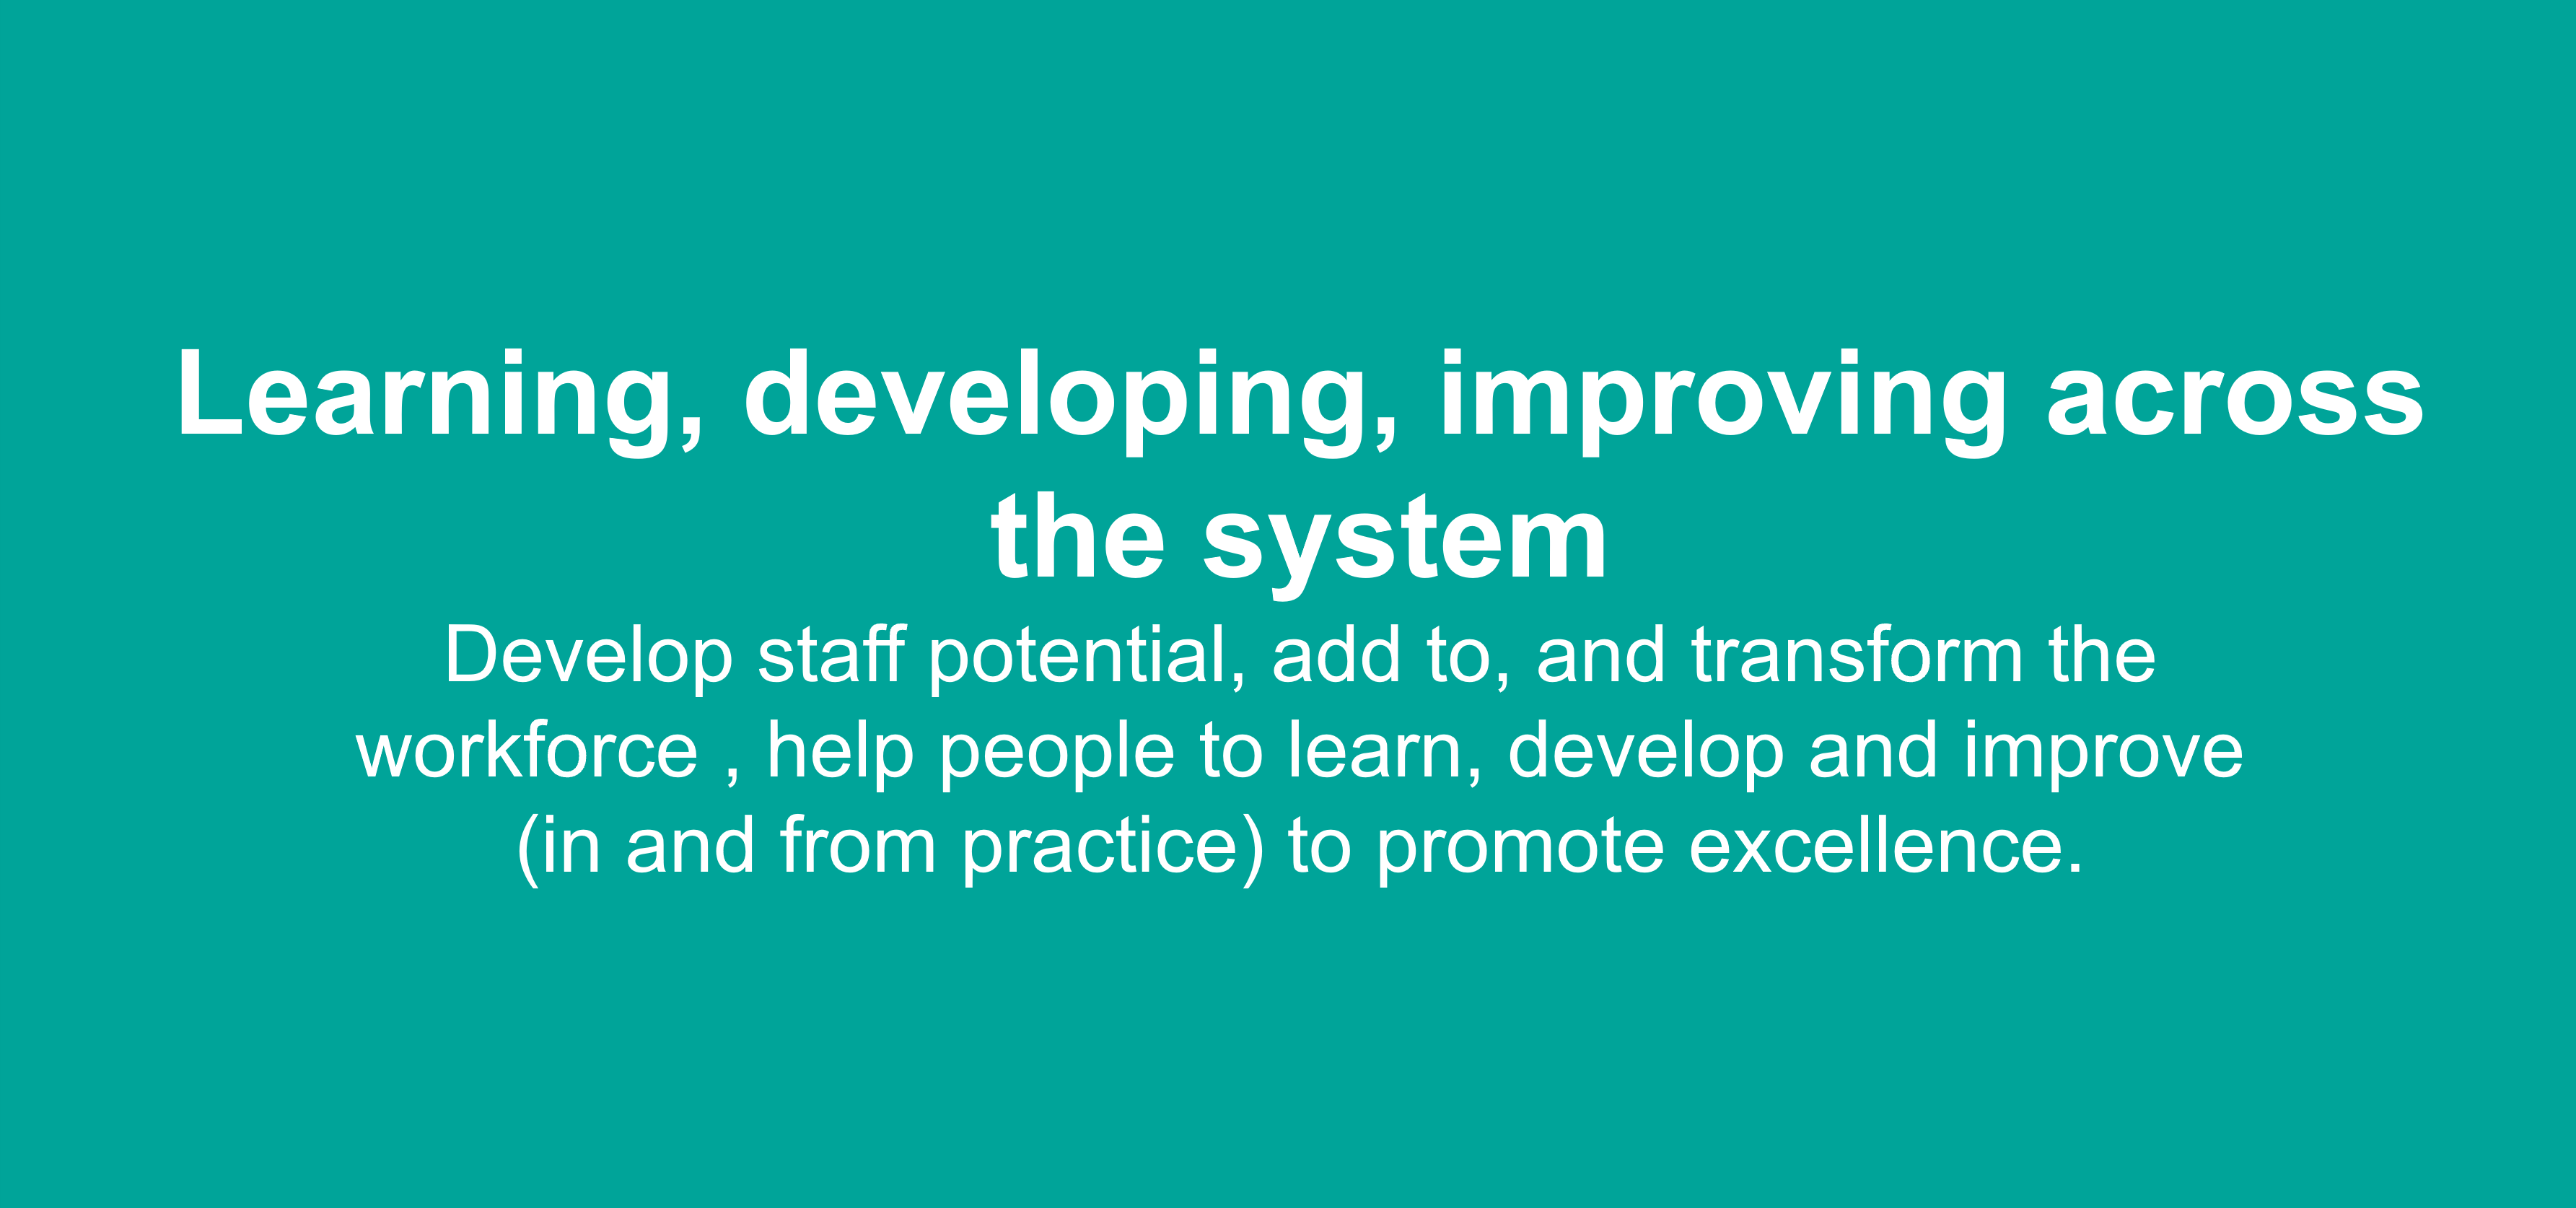 Consultant - Learning, developing, improving across the system
Develop staff potential, add to, and transform the workforce, help people to learn, develop and improve (in and from practice) to promote excellence.
